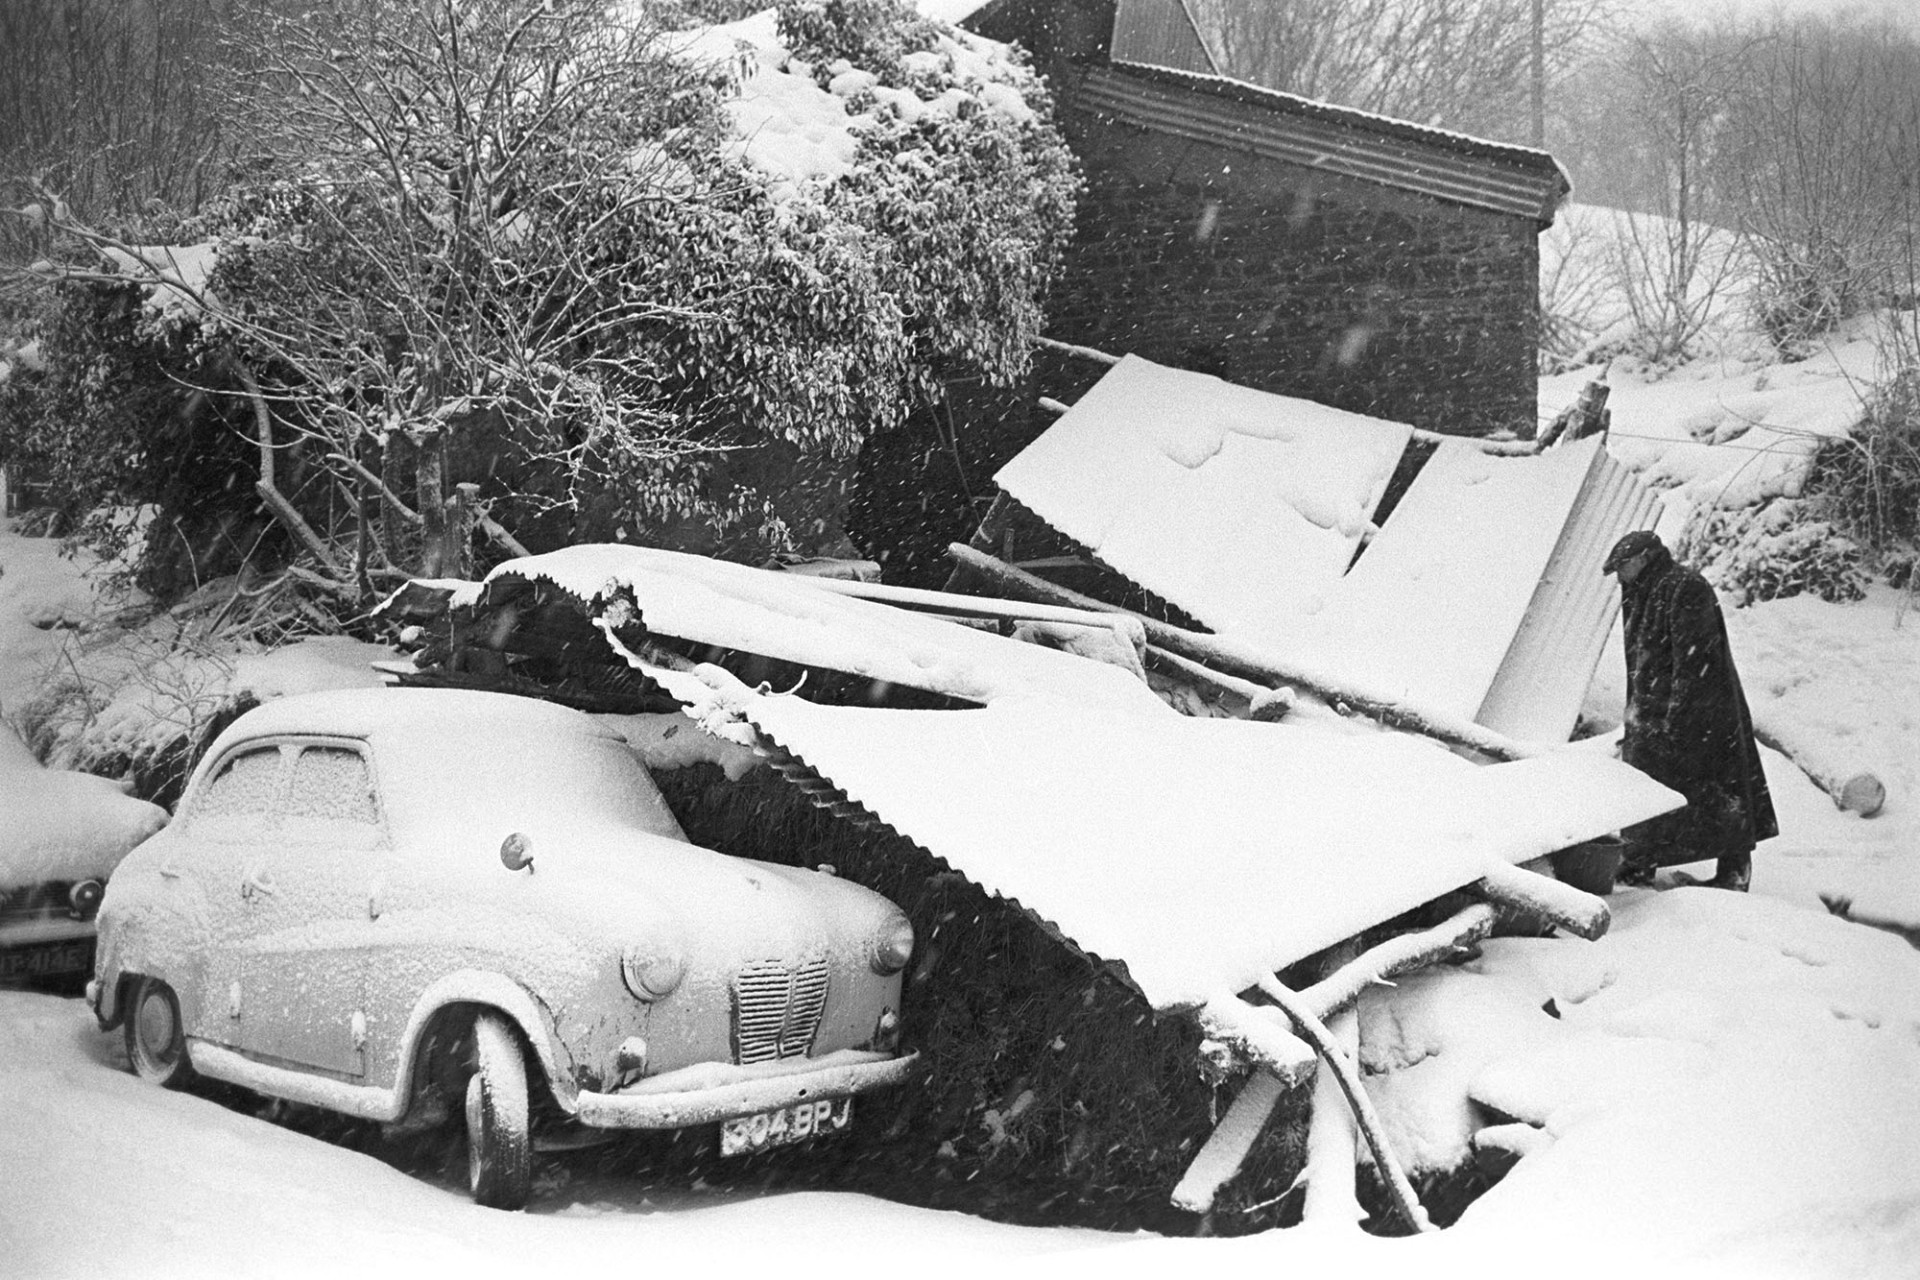 Snow, sheds collapsed under the weight of snow, car. Man looking for ferret under shed. 
[Ivor Brock looking for a ferret under corrugated iron sheds which have collapsed under the weigh of snow at Millhams, Dolton. In the foreground a Baby Austin car is also covered in snow.]